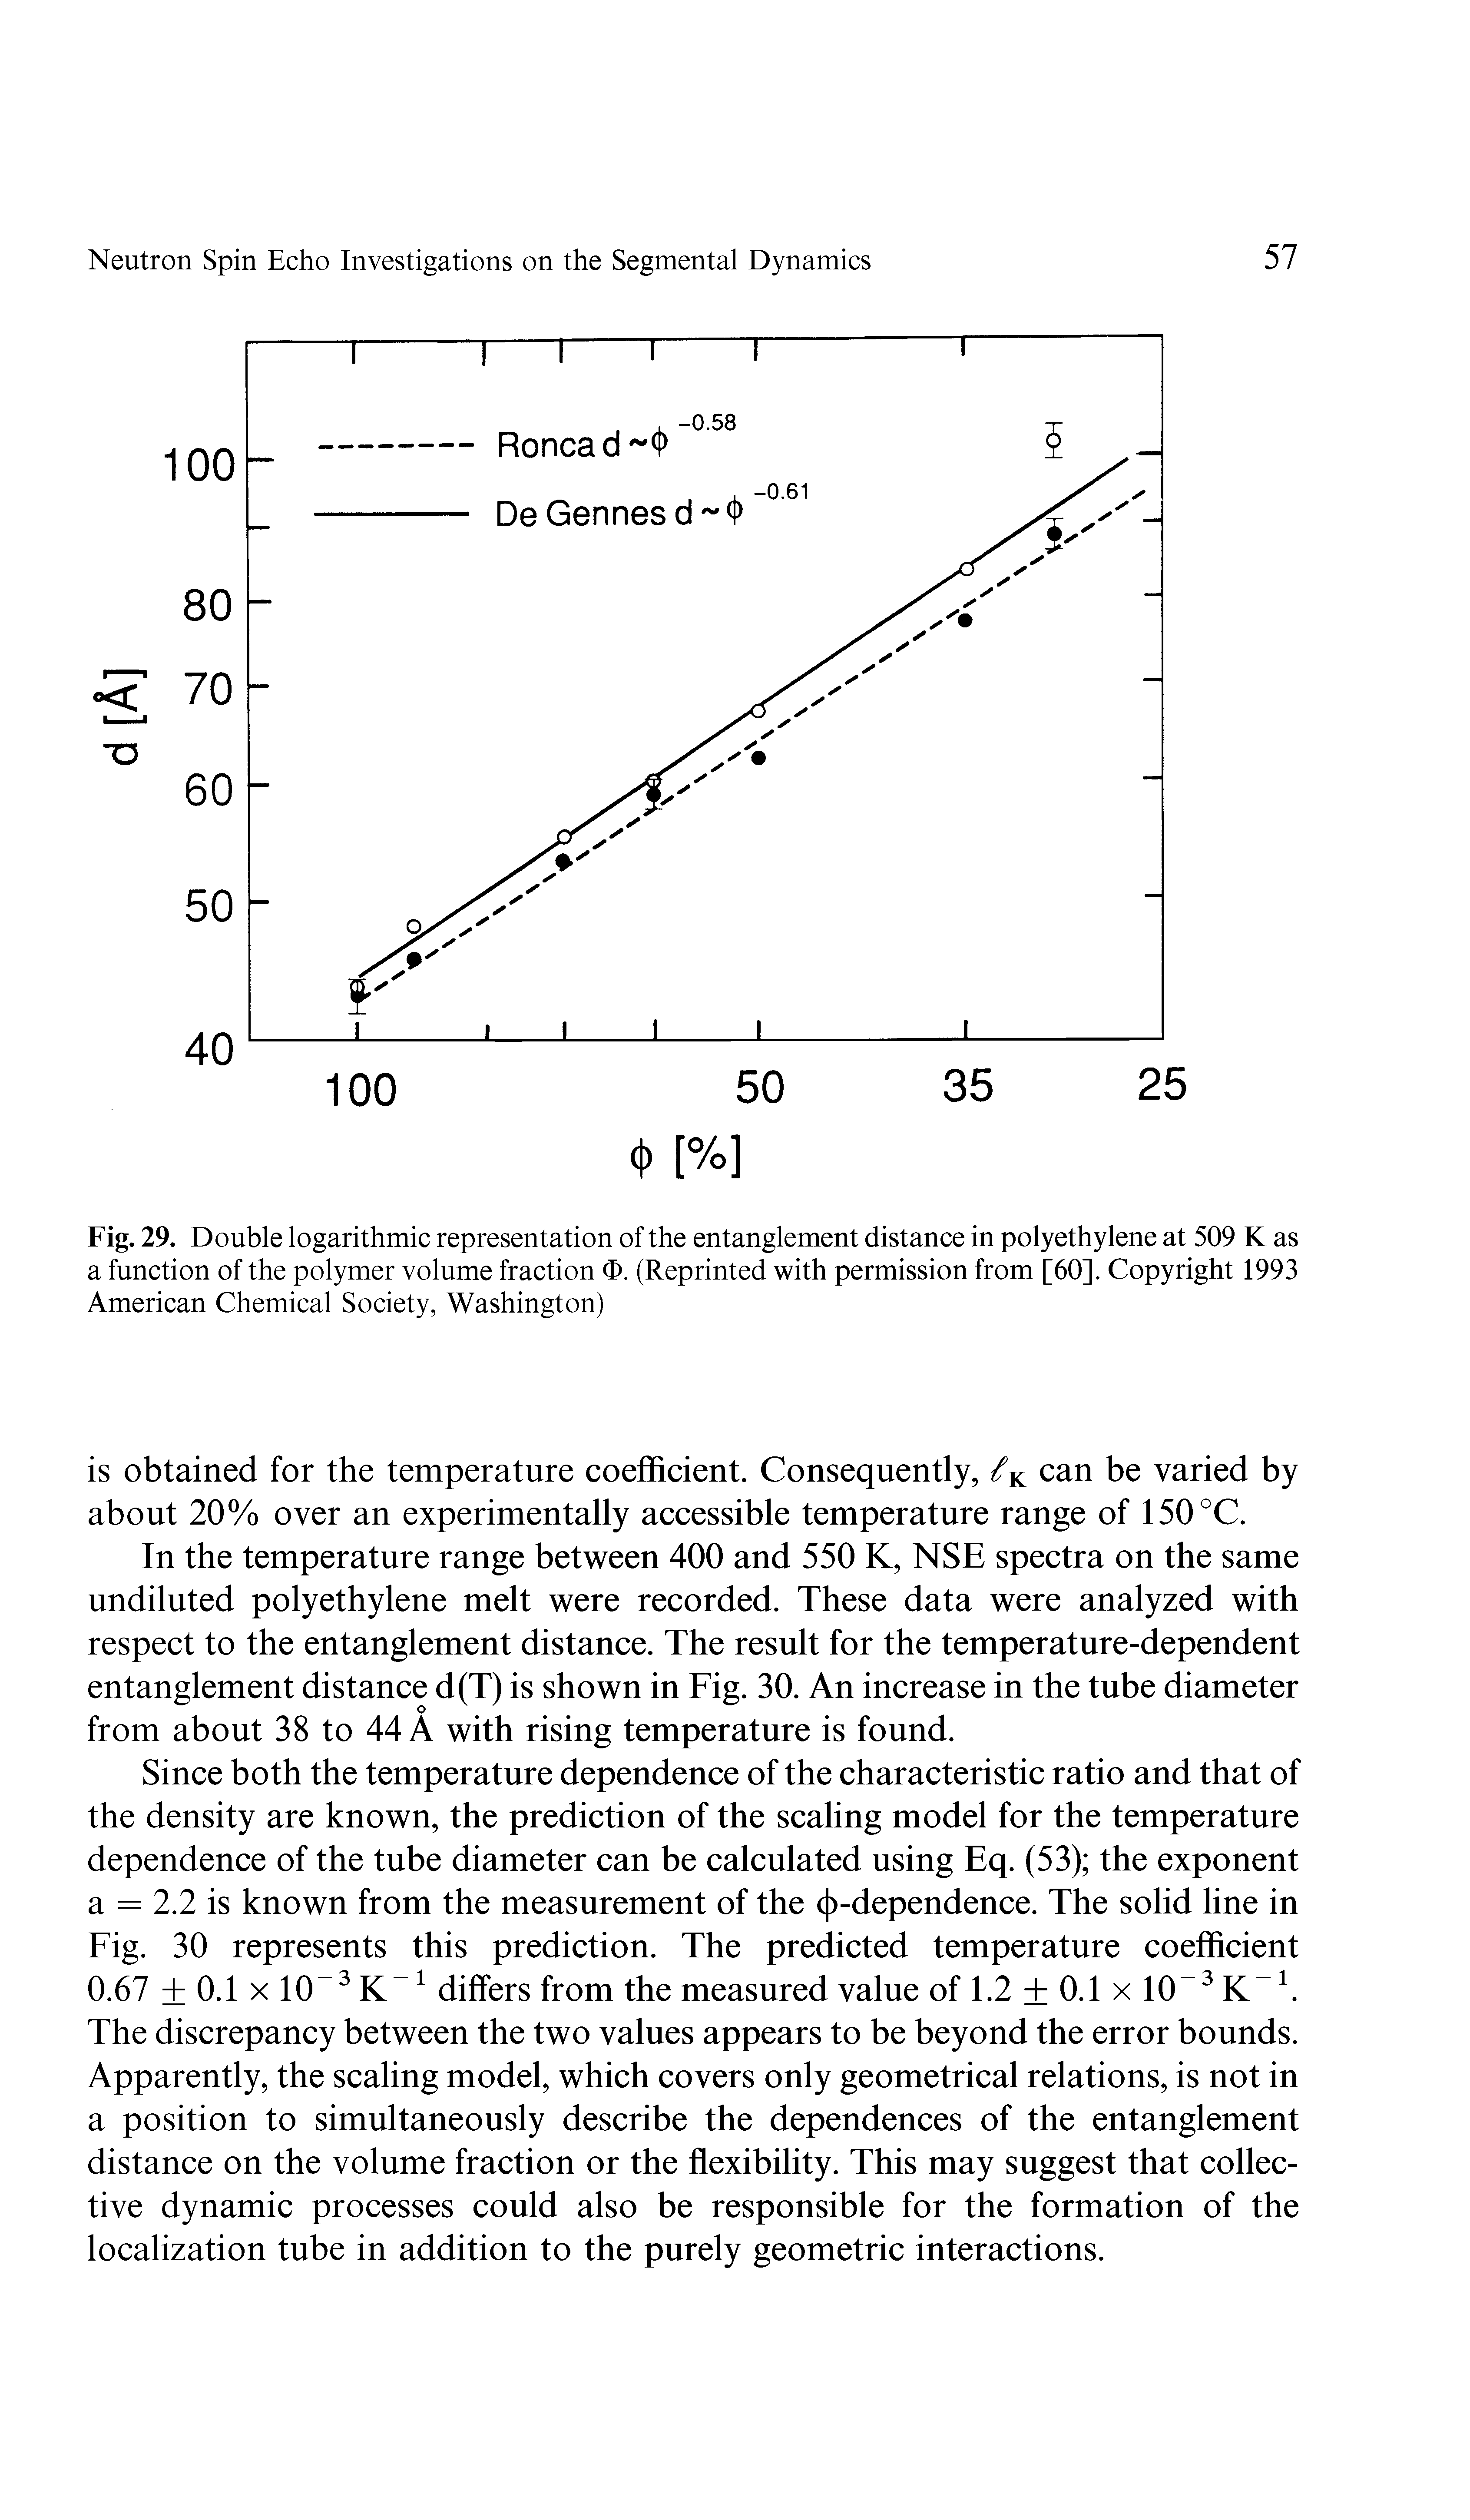 Fig. 29. Double logarithmic representation of the entanglement distance in polyethylene at 509 K as a function of the polymer volume fraction >. (Reprinted with permission from [60]. Copyright 1993 American Chemical Society, Washington)...